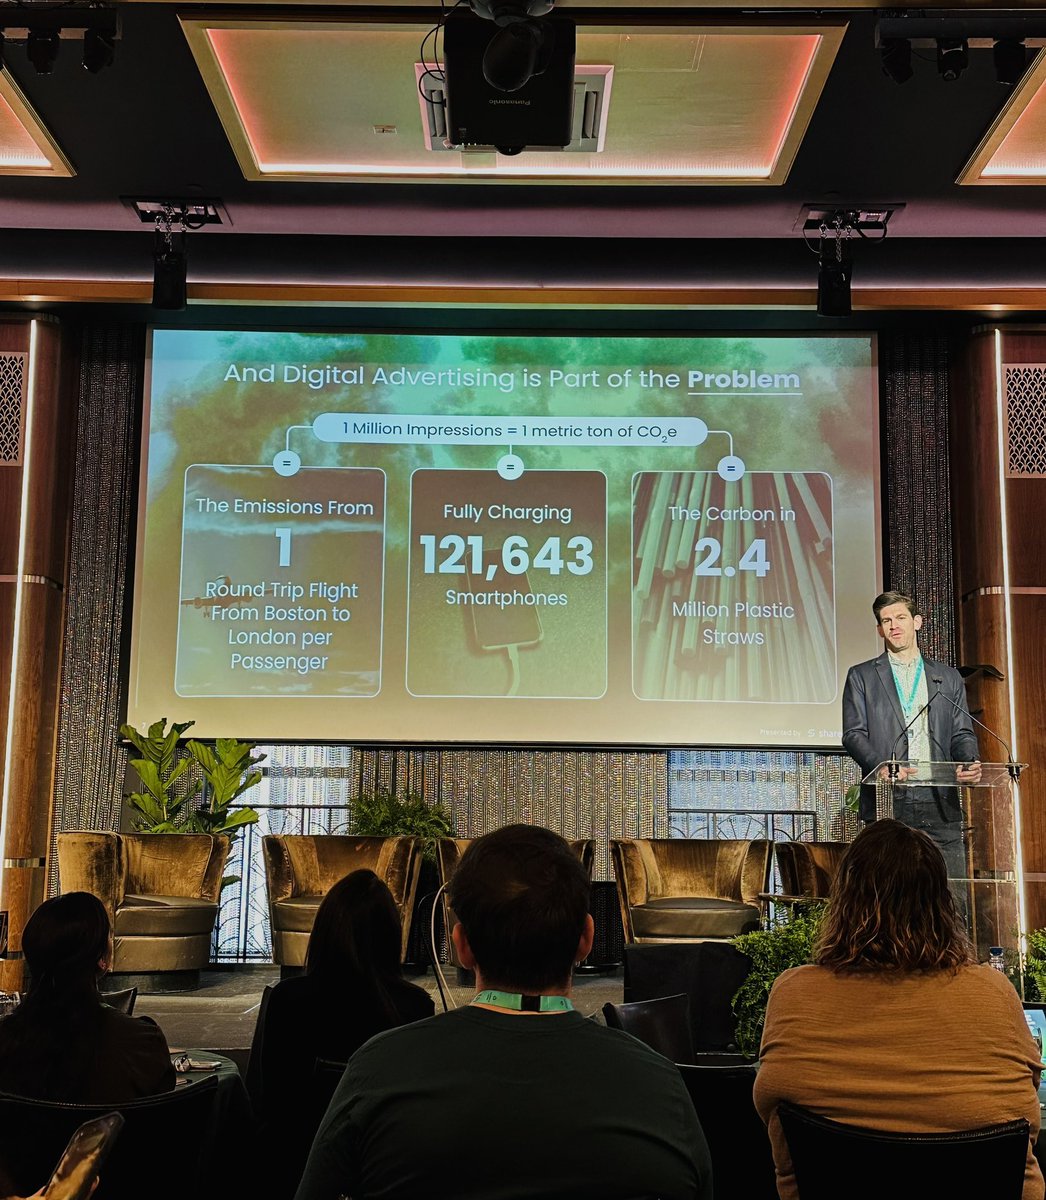 Advertising can become one of the 1st industries to reach net-zero emissions 🌿 Really inspirational conference! 

#GreenMediaSummit #sustainability #digitaladvertising #netzeroads @sharethrough